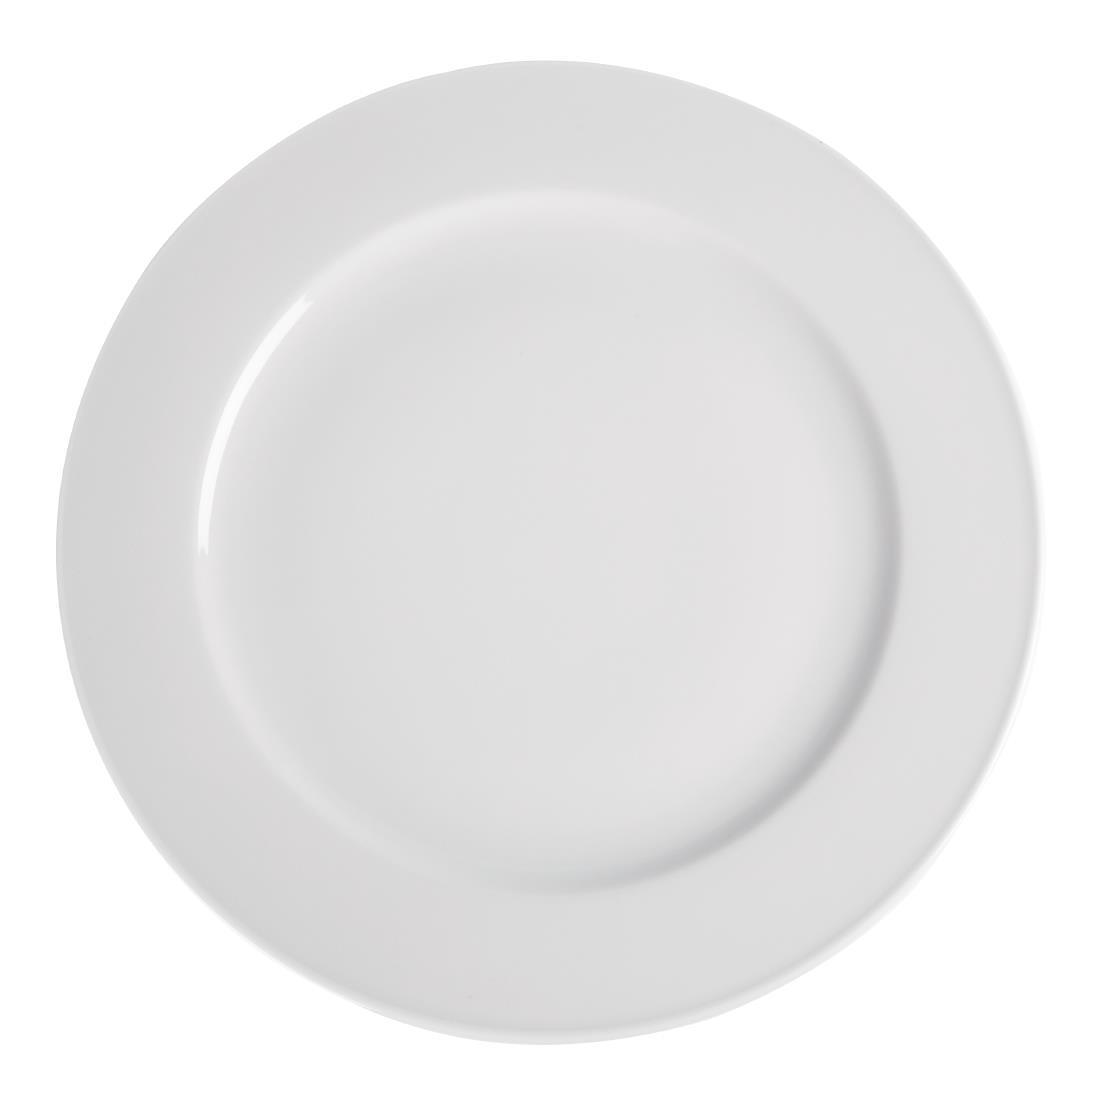 Royal Porcelain Classic White Wide Rim Plates 310mm (Pack of 12) - CG011  - 3